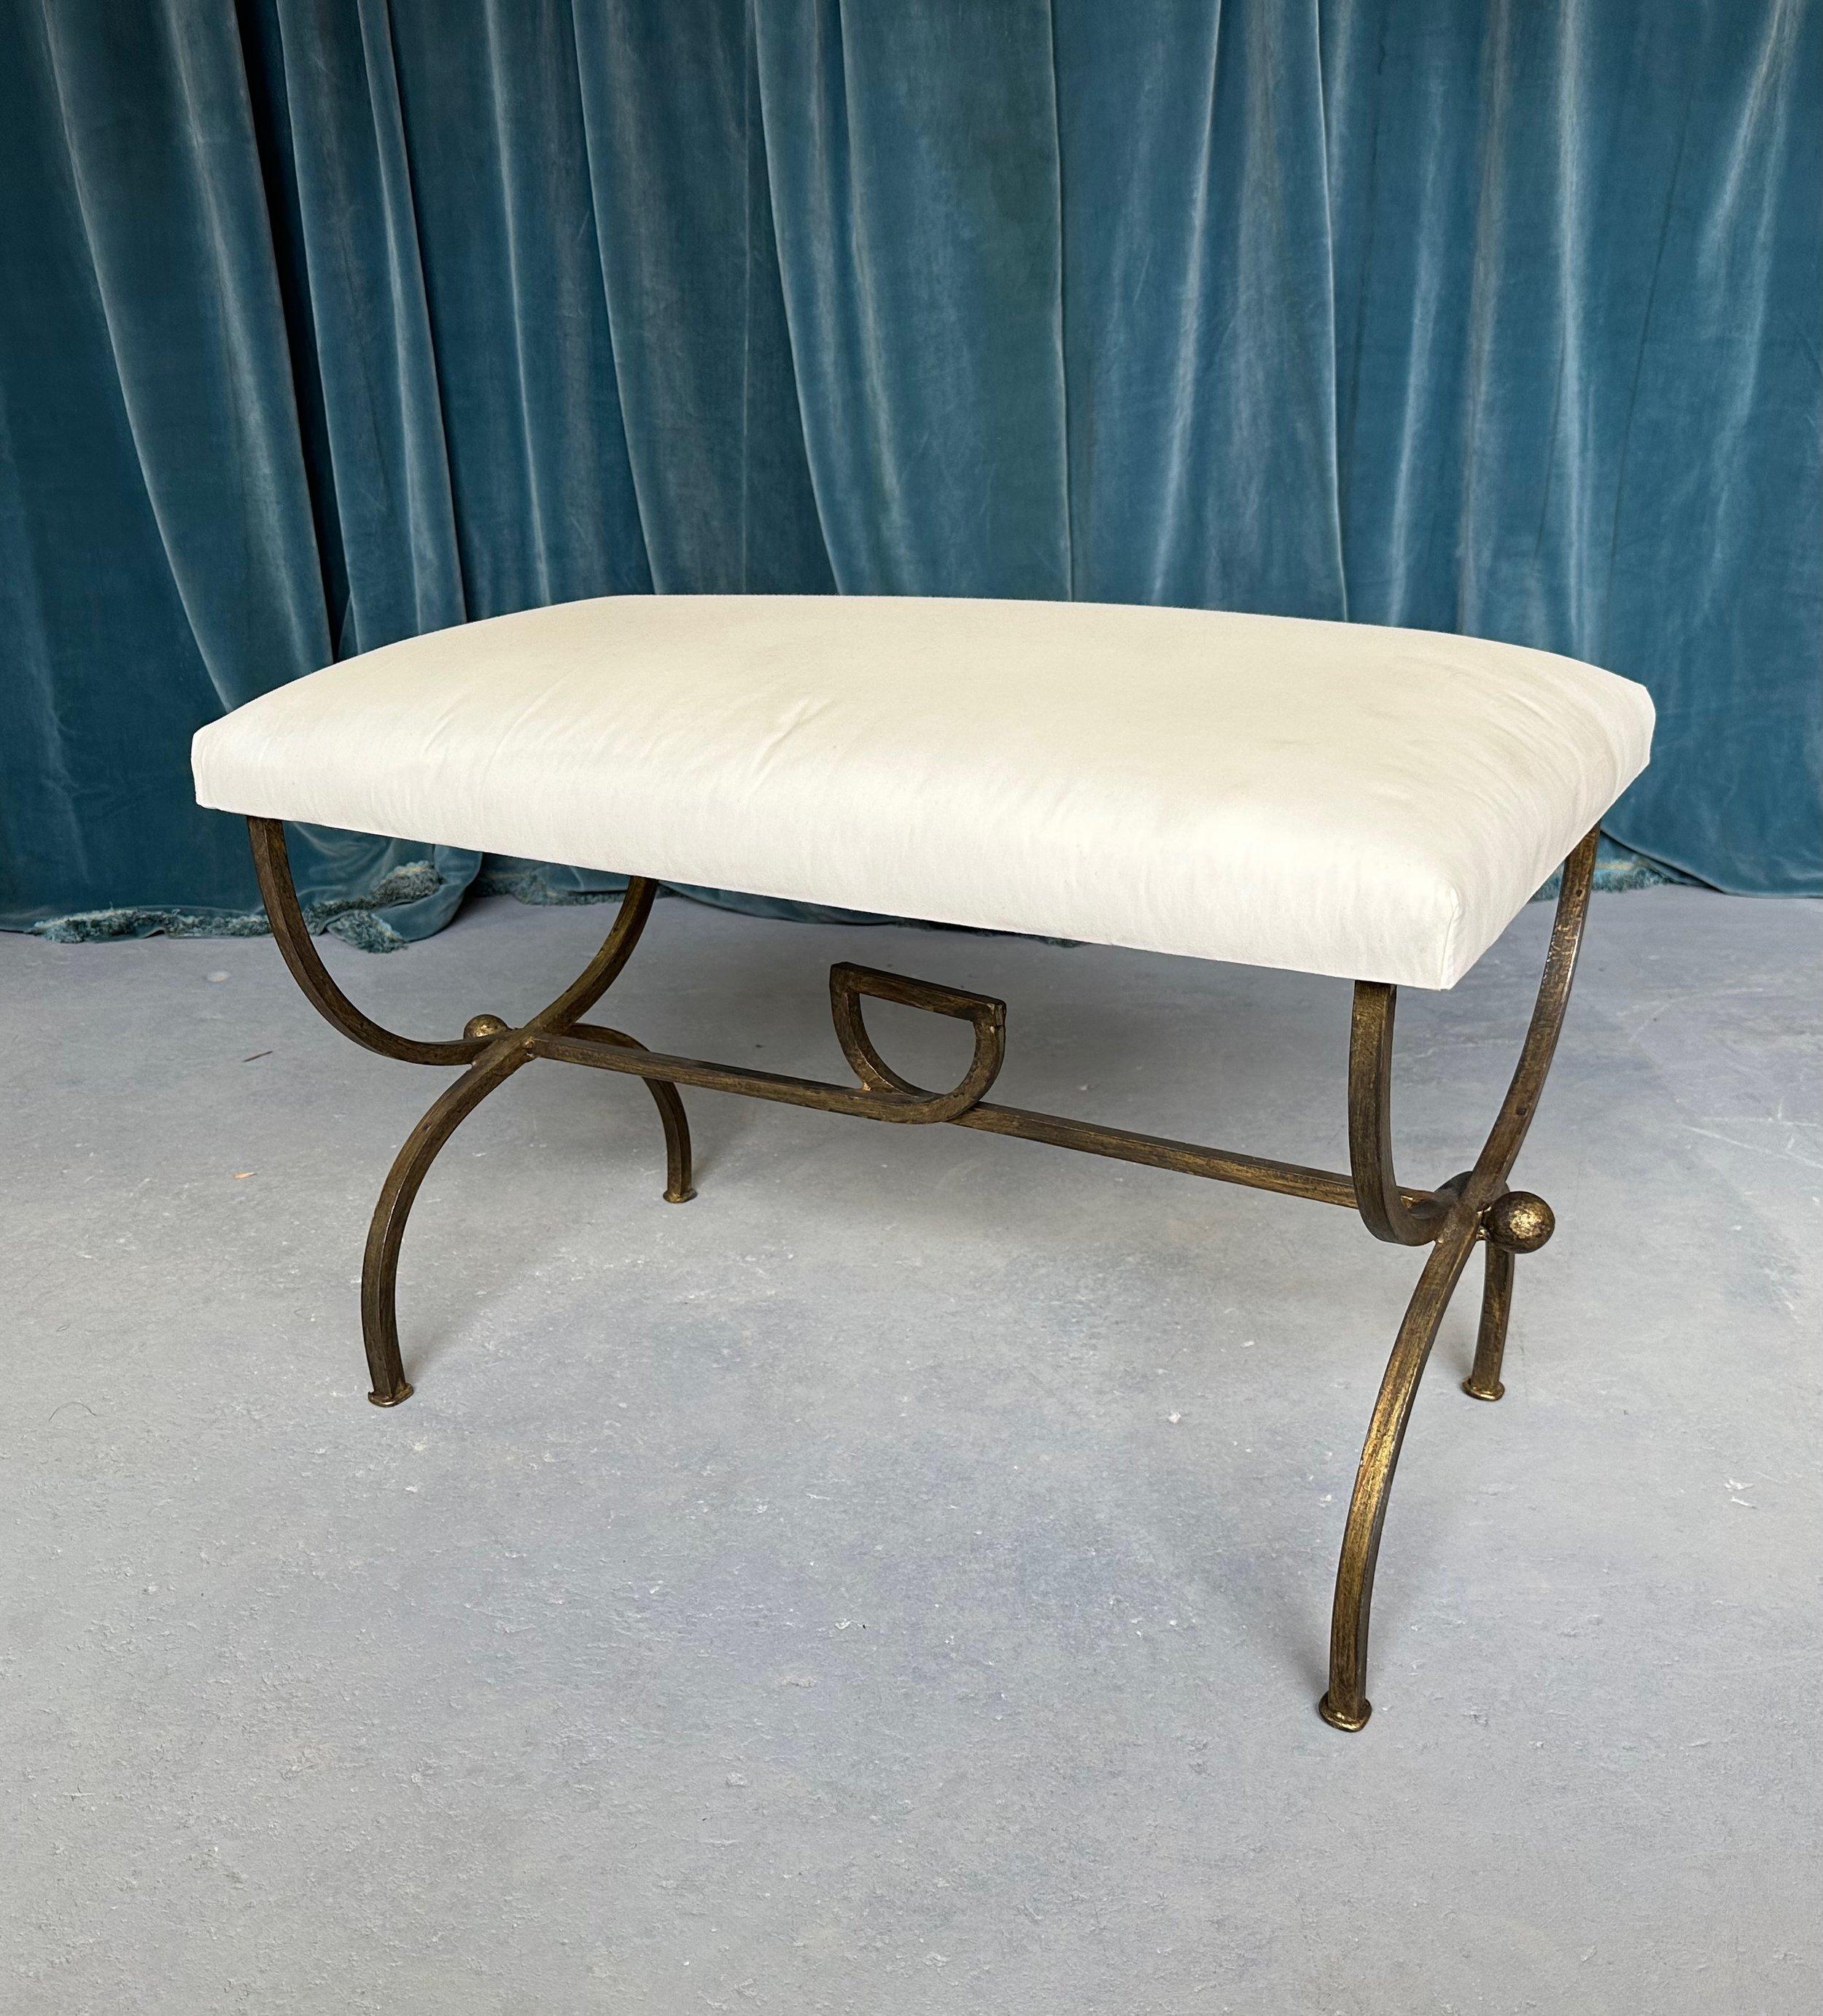 An elegant recently made iron bench with gracefully curved legs and a central stretcher that features a decorative central loop and spheres at the ends. Handcrafted by expert European artisans using traditional iron-working techniques, this lovely